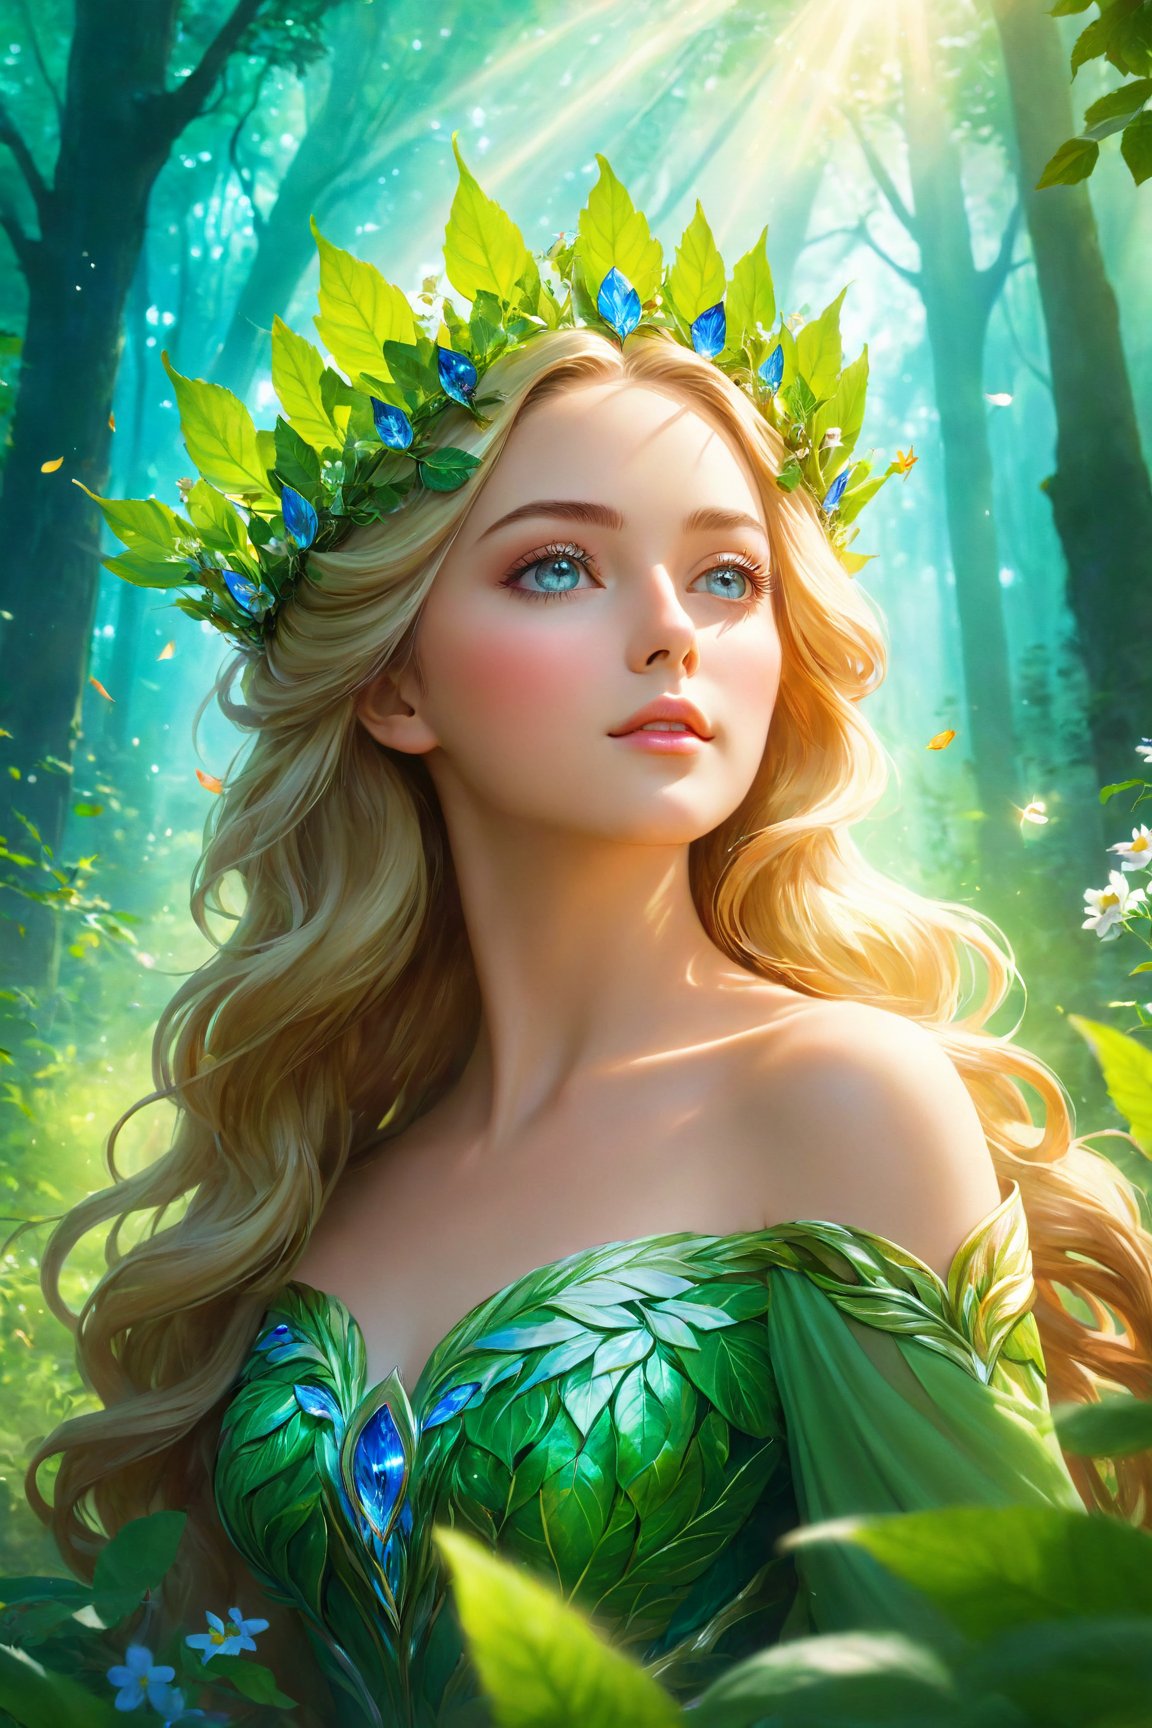 (best quality,  4k,  8k,  highres,  masterpiece:1.2),  ultra-detailed,  (realistic,  photorealistic,  photo-realistic:1.37),  nature goddess,  leaf body,  portrait,  greenery,  wildflowers,  breathtaking eyes,  serene expression,  graceful pose,  ethereal beauty,  luminous skin,  flowing hair,  elegant crown of leaves,  soft natural light,  vibrant colors,  mythical essence,  surreal atmosphere,  dreamlike aura,  harmonious connection with nature,  enchanted forest.